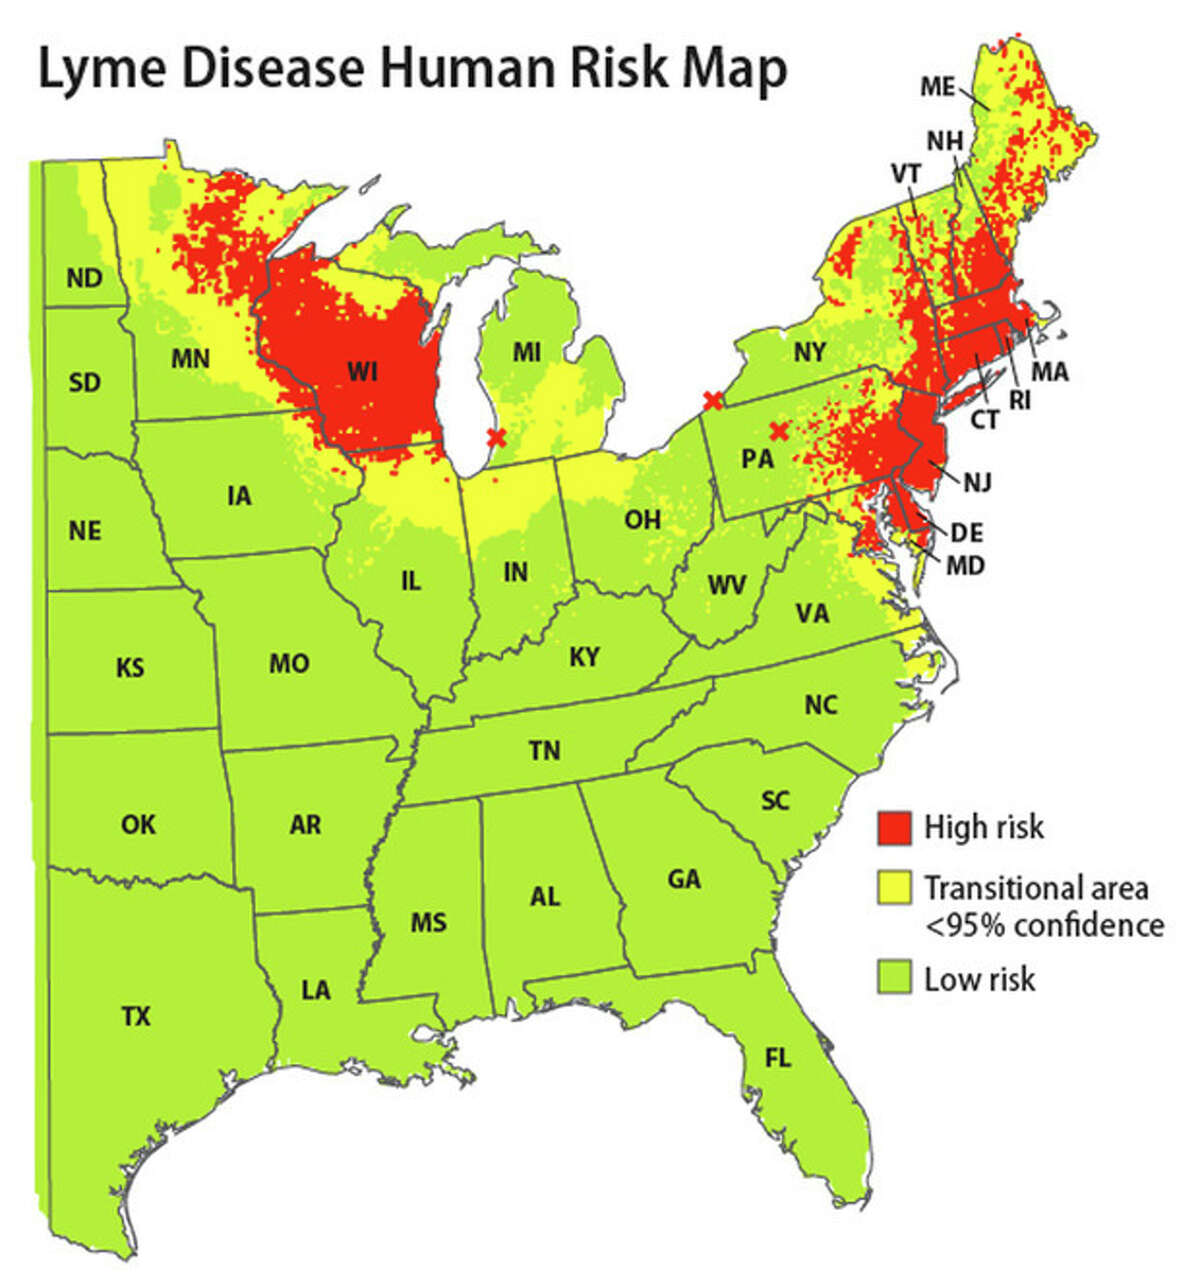 This map released by the Yale School of Public Health on Friday, Feb. 3, 2012 shows a map which indicates areas of the eastern United States where people have the highest risk of contracting Lyme disease based on data from 2004-2007. Researchers dragged sheets of fabric through the woods to snag ticks for the survey. The map shows a clear risk across much of the Northeast, from Maine to northern Virginia. Researchers at Yale University also identified a high-risk region across most of Wisconsin, northern Minnesota and a sliver of northern Illinois. Areas highlighted as "emerging risk" regions include the Illinois-Indiana border, the New York-Vermont border, southwestern Michigan and eastern North Dakota. (AP Graphic/Yale School of Public Health, Maria Diuk-Wasser)